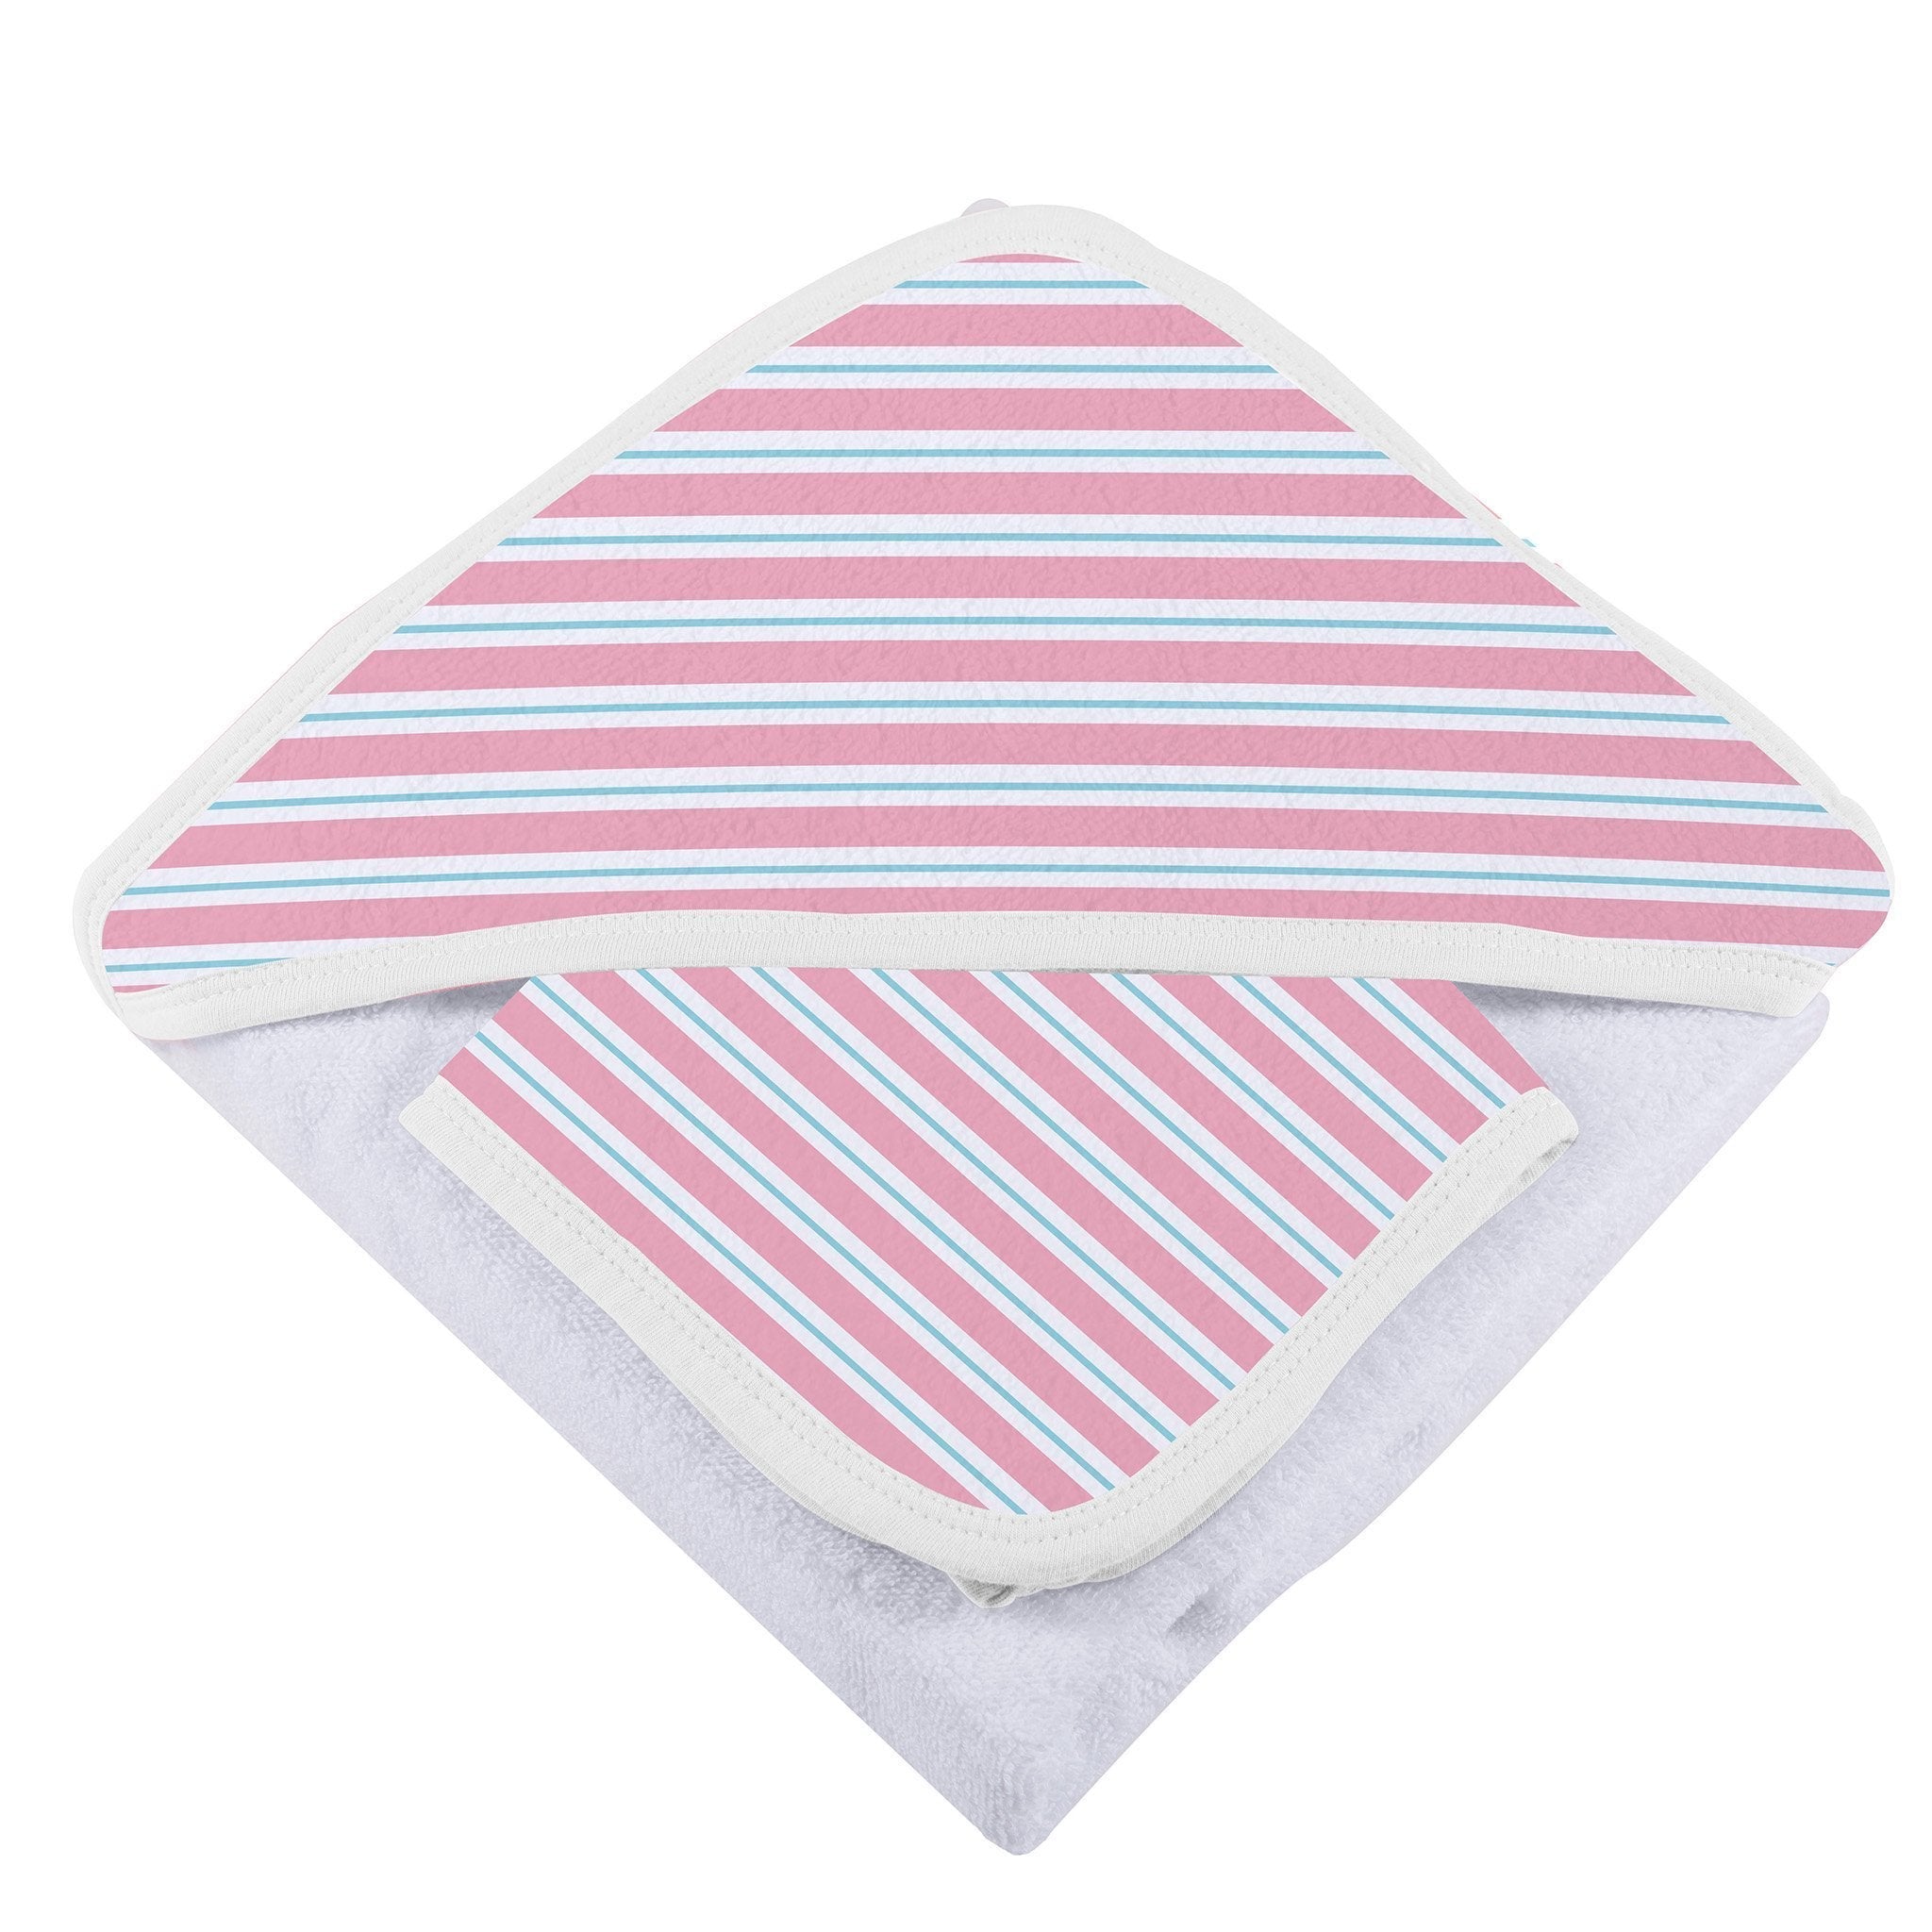 Newcastle Classic Candy Stripe Bamboo Hooded Towel